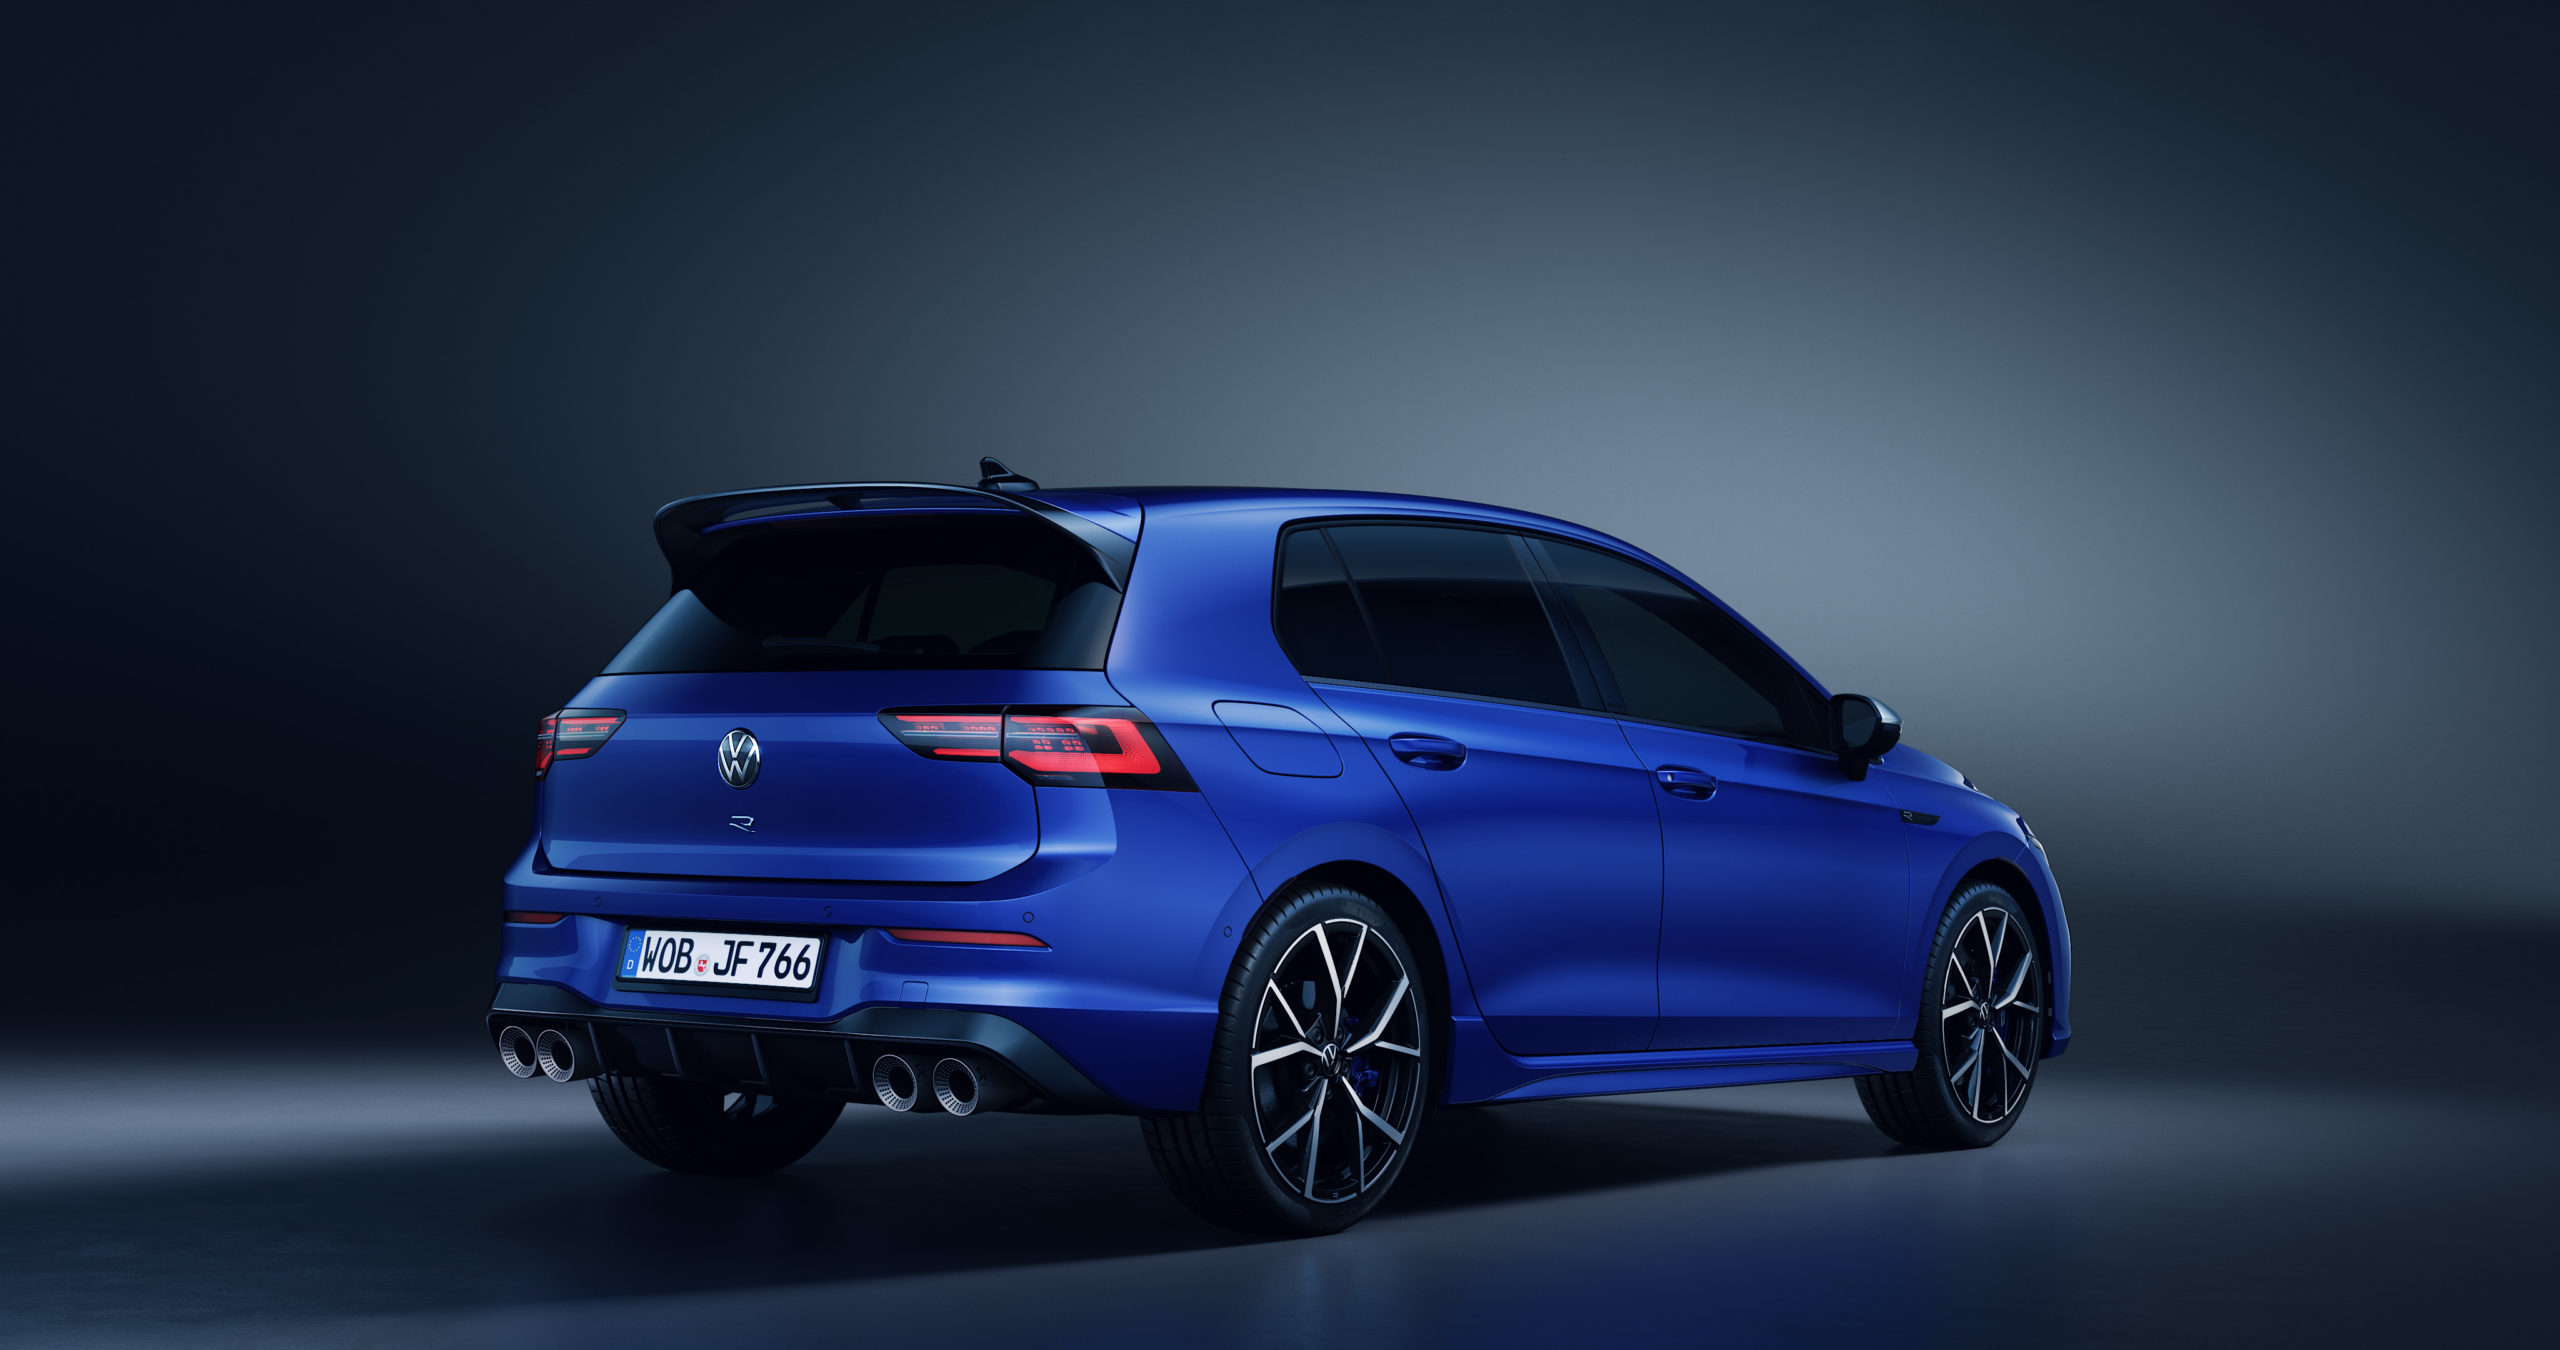 The 2022 Volkswagen Golf R Is The Most Powerful Production Golf Ever And Keeps The Manual